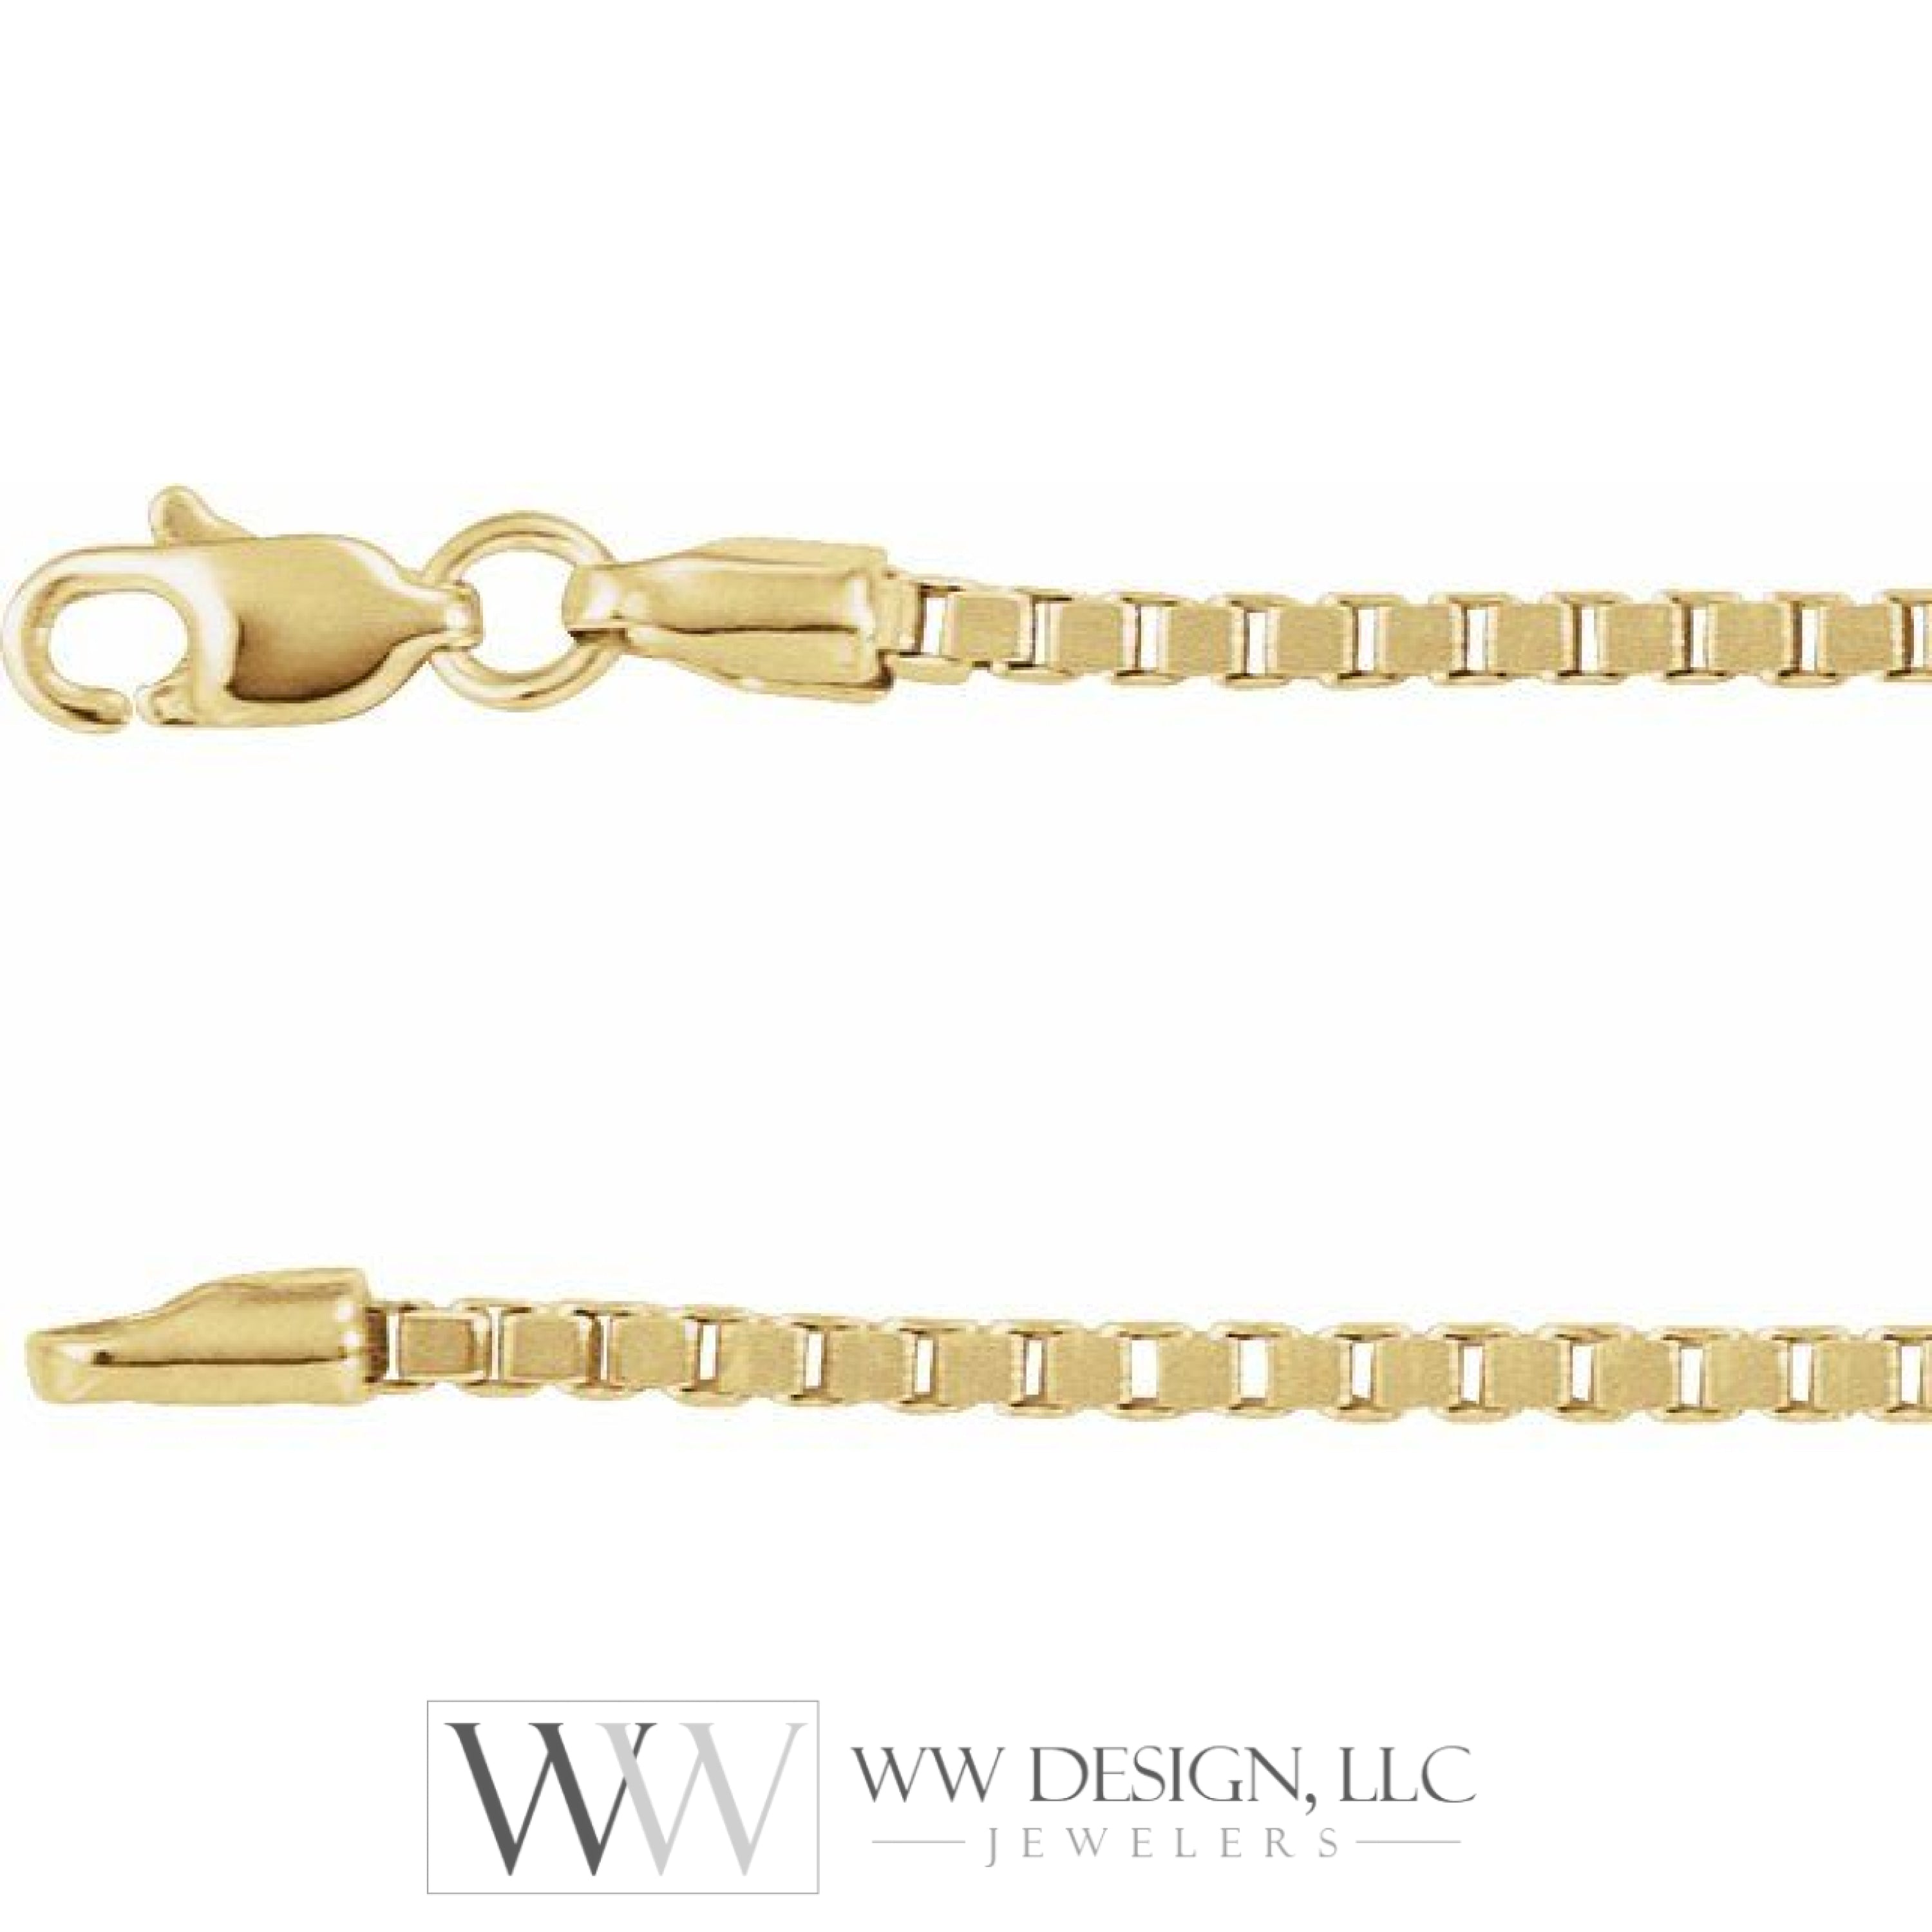 1.82Mm Box Chain Bracelet Or Necklace - 14K Gold (Y R W) Sterling Silver